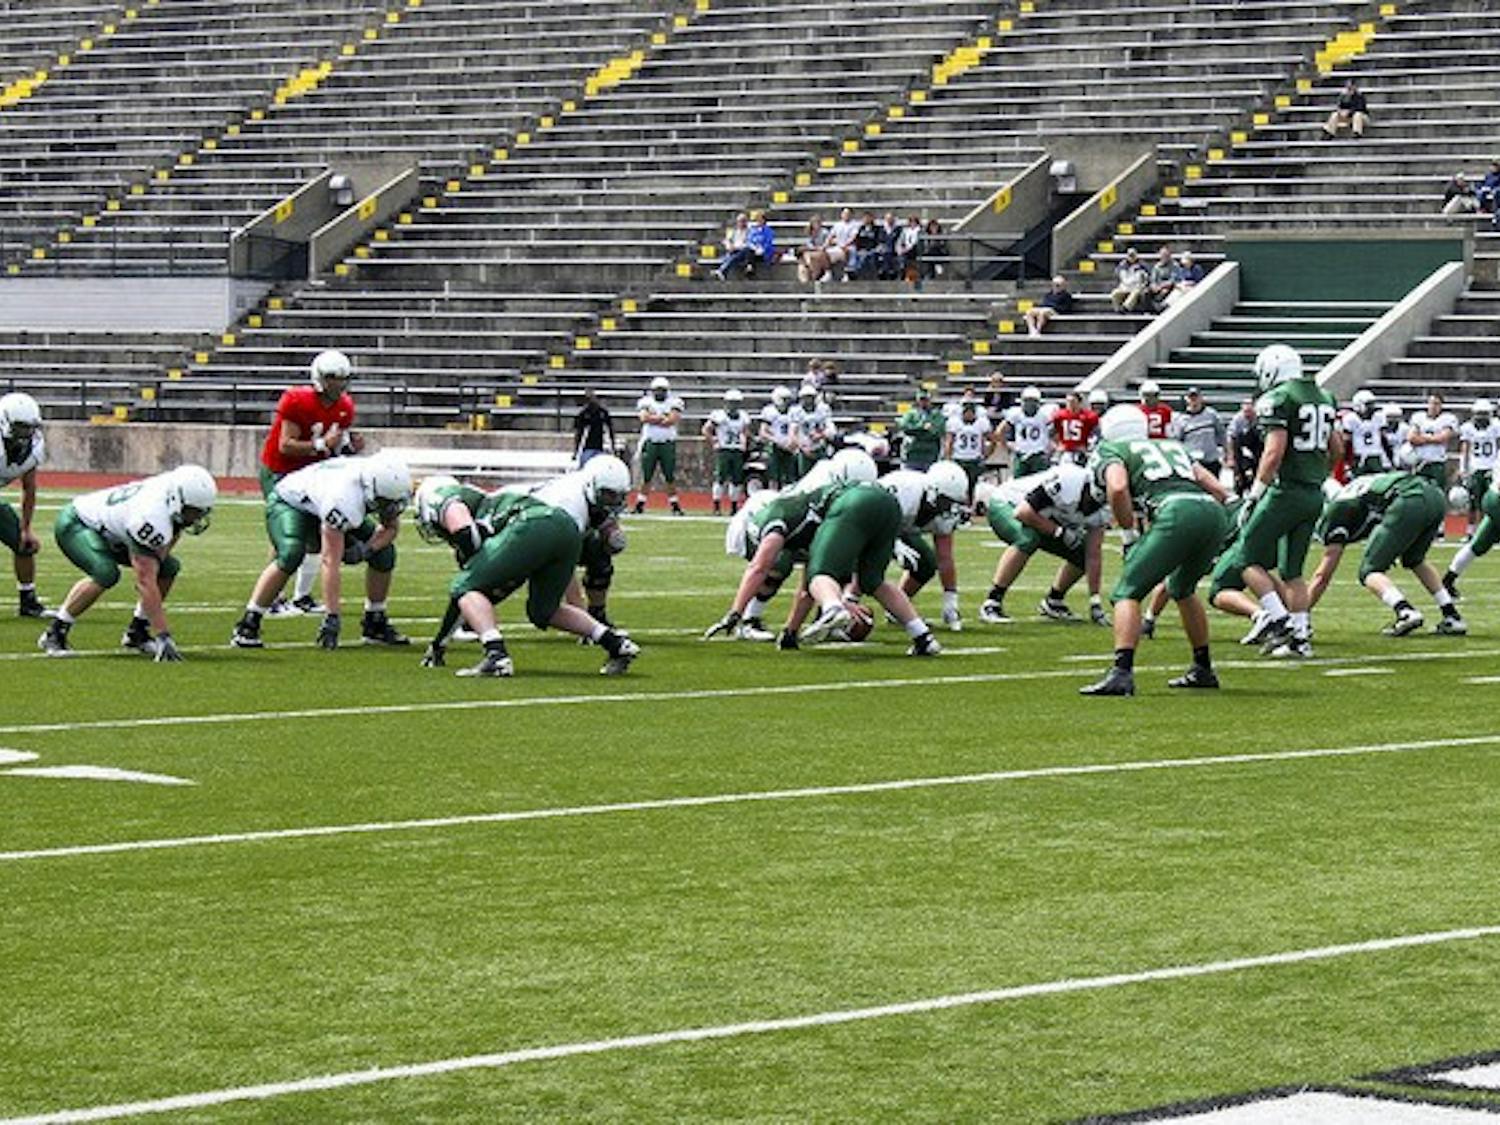 New starting quarterback Alex Park '14 threw for 296 yards and two touchdowns in the Green and White Game this spring.